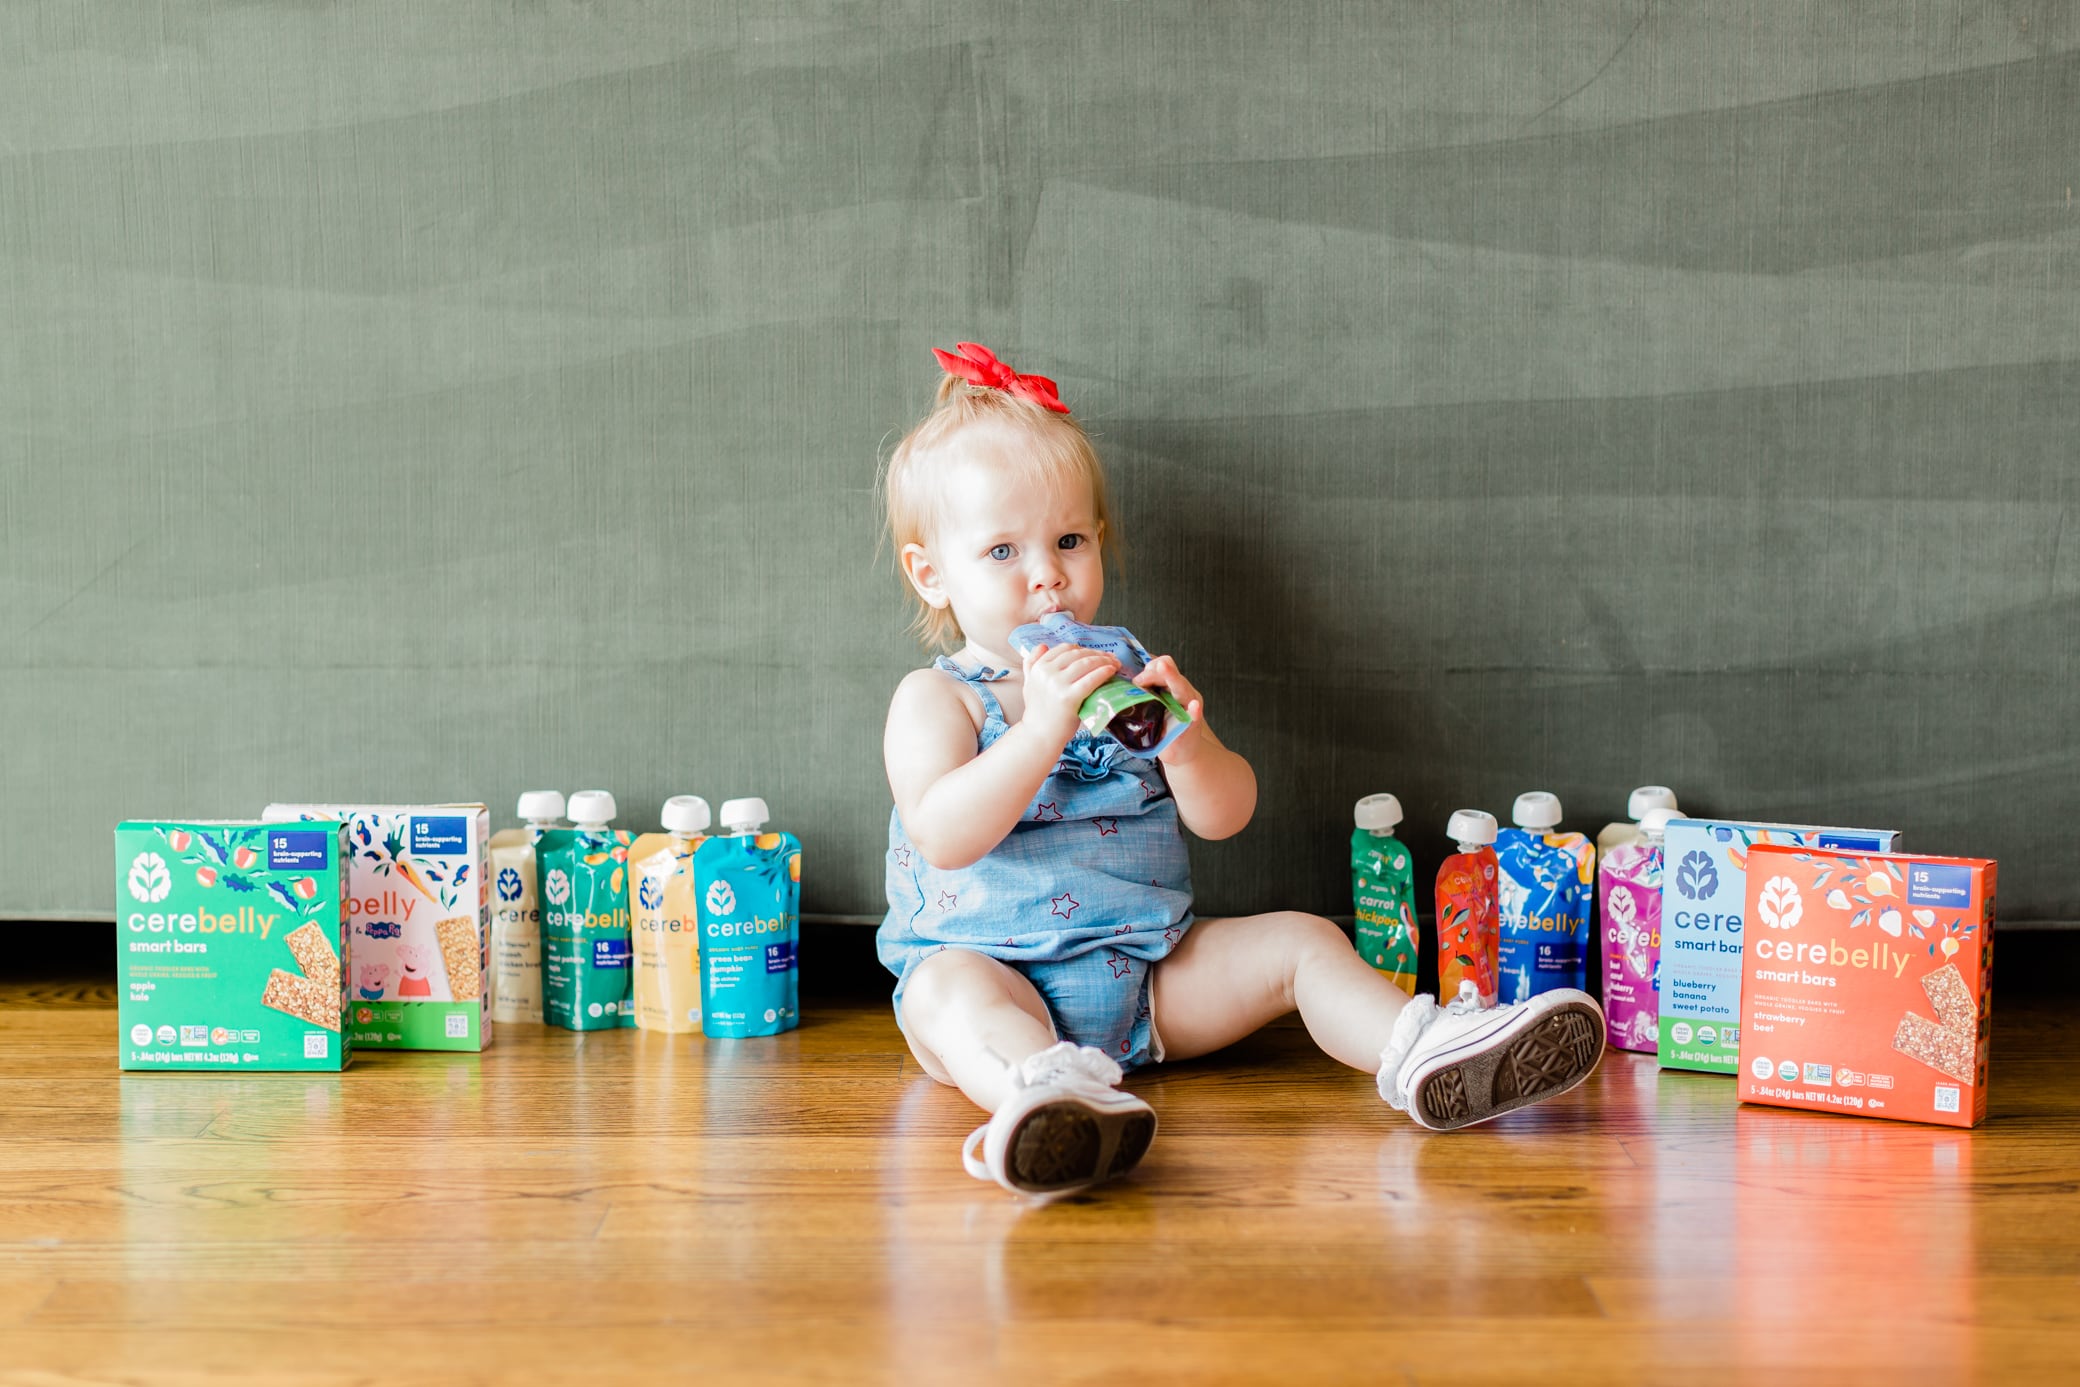 Toddler girl sitting on the floor with Cerebelly products.